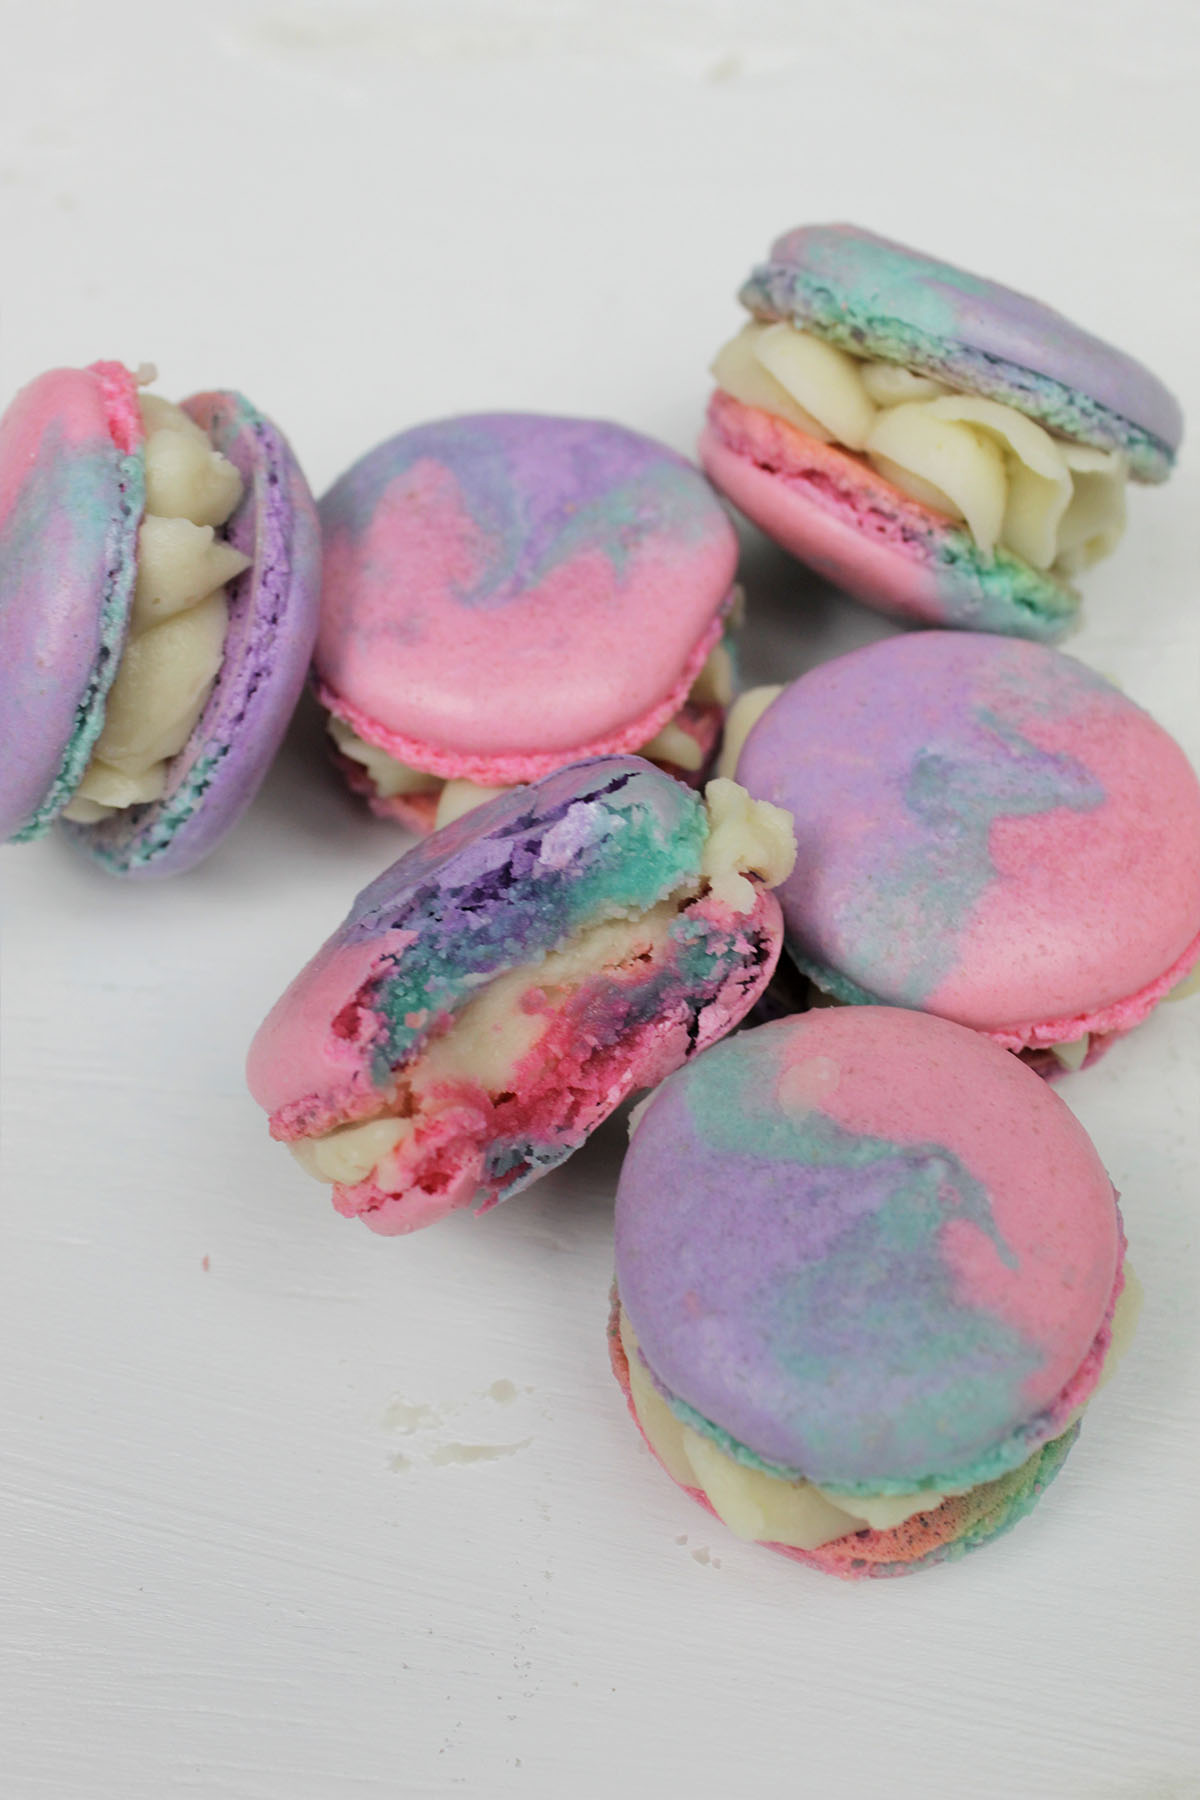 Pile of tie-dye macarons, with one cut in half.